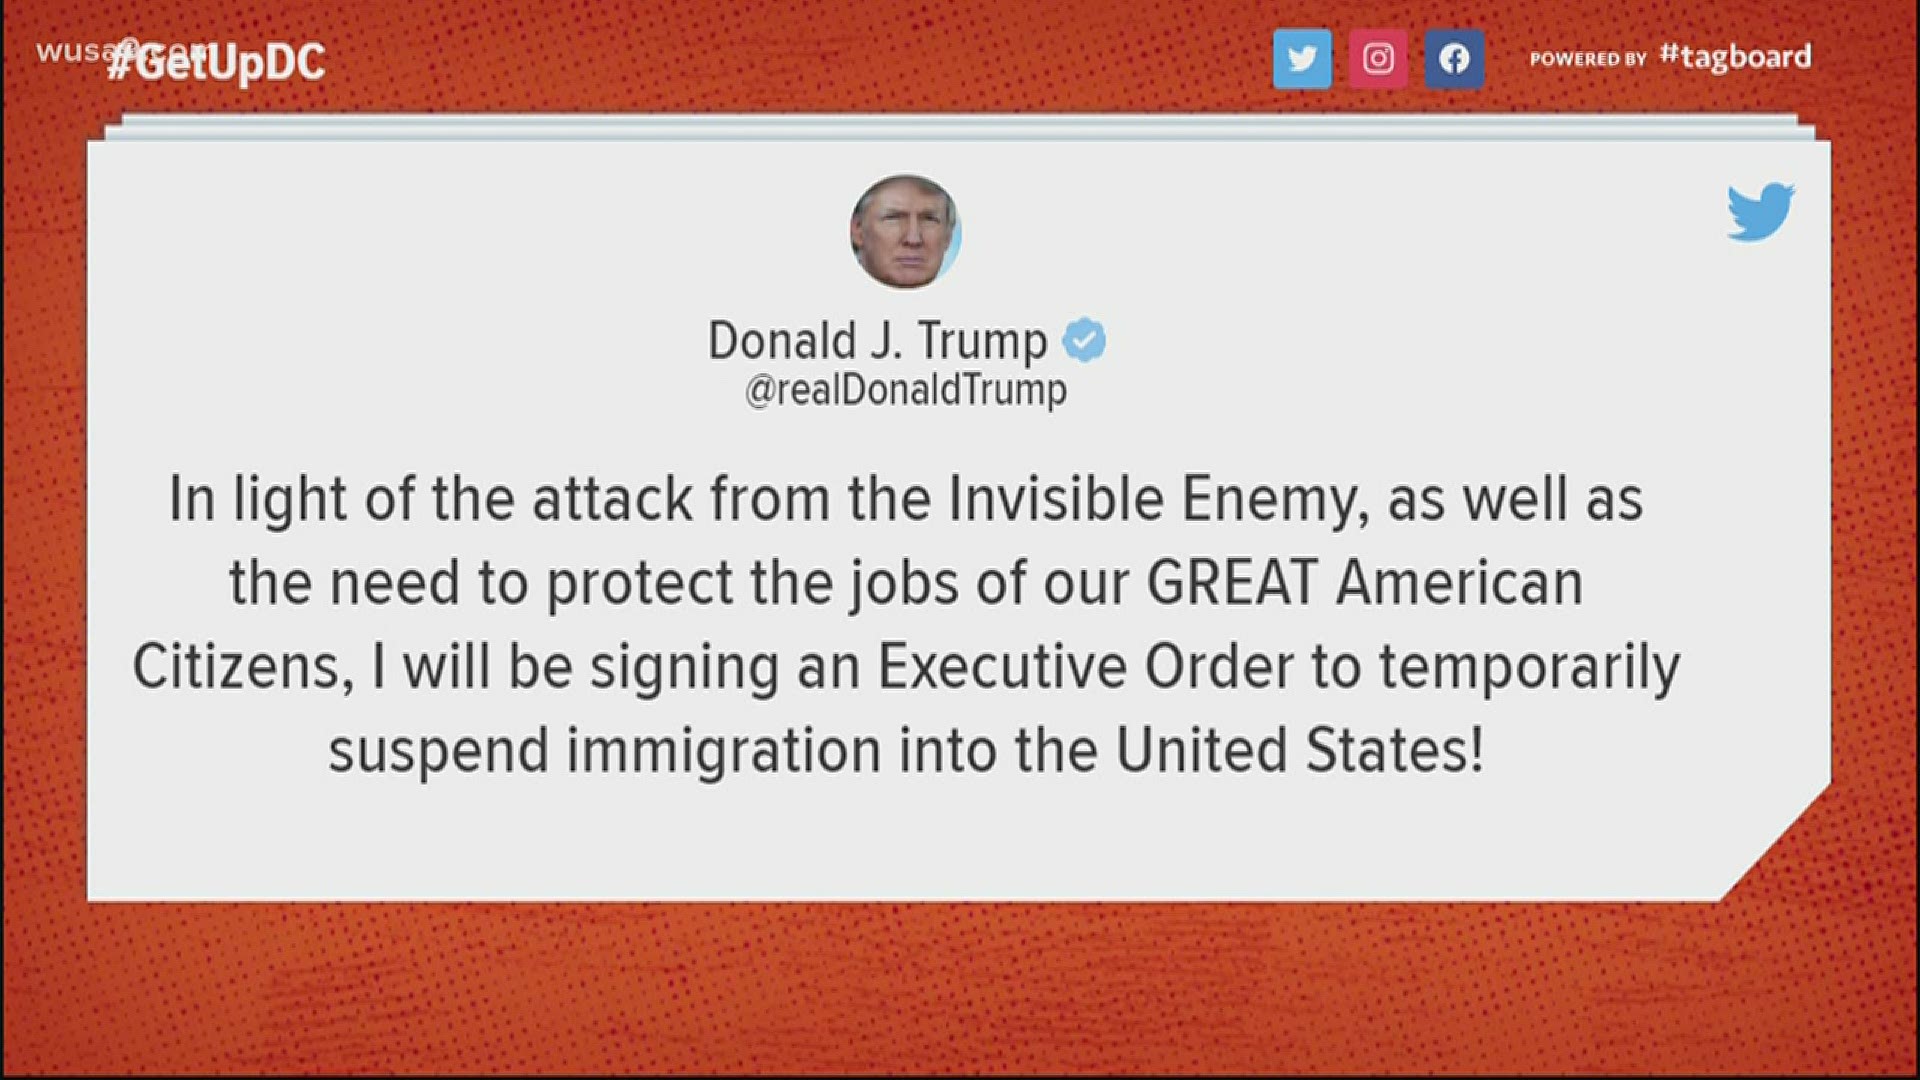 The President tweeted late Monday night that he was temporarily suspending all immigration "in light of the attack from the Invisible Enemy."